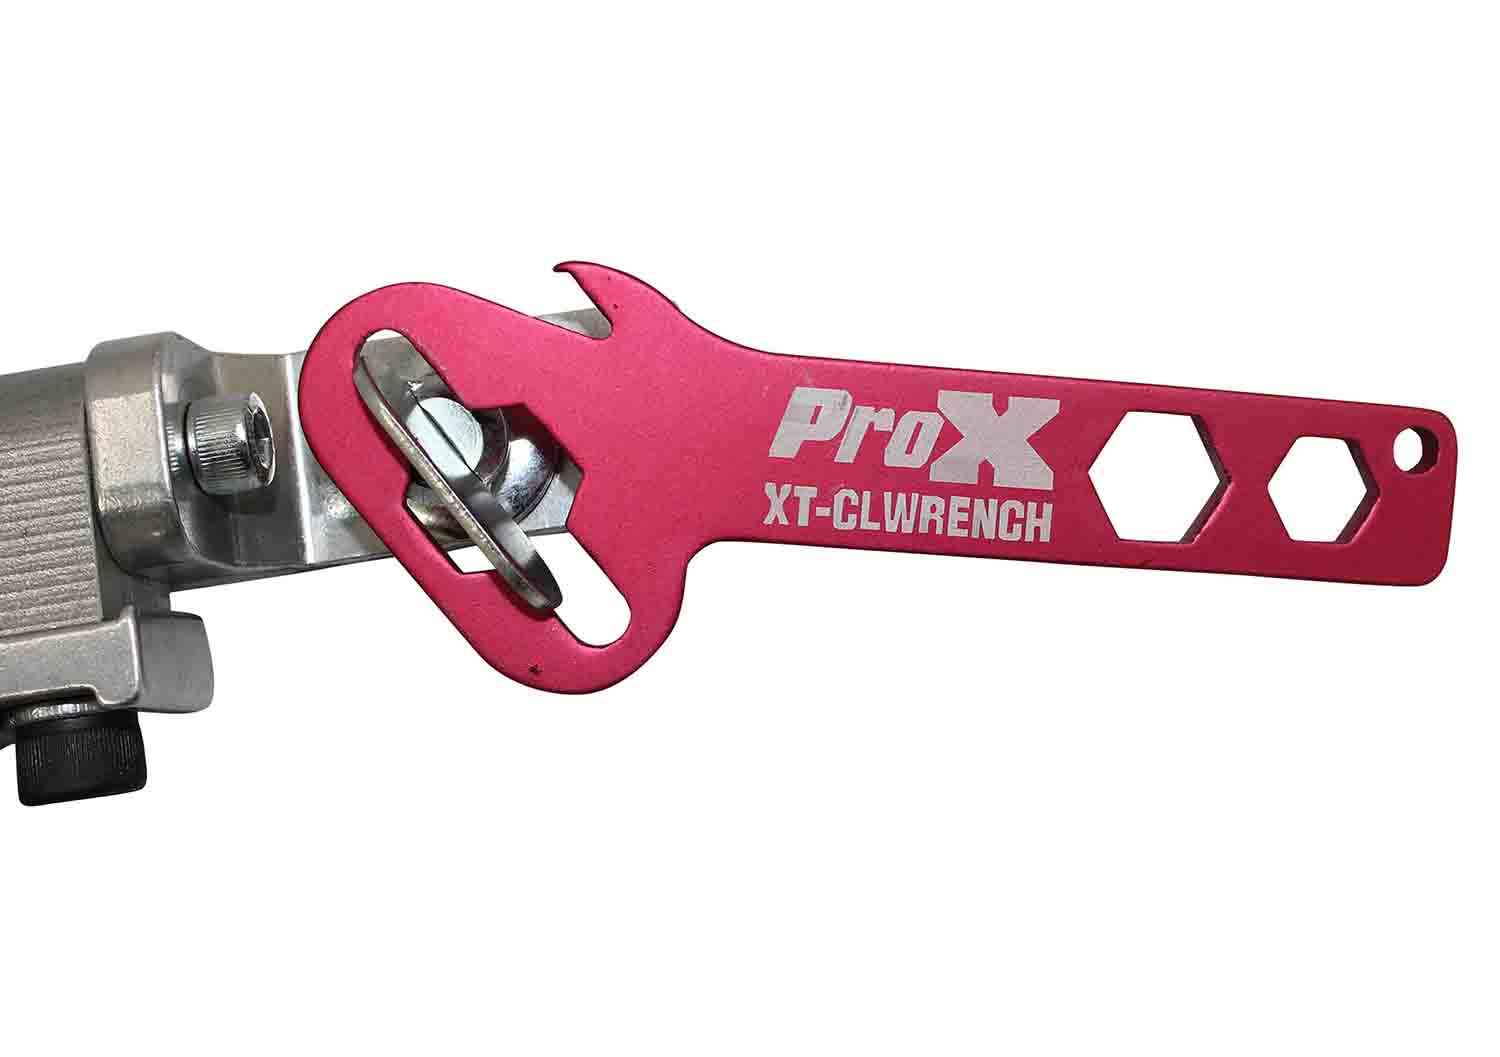 ProX XT-CLWRENCH Multi-Function Monkey Wrench - Red - Hollywood DJ